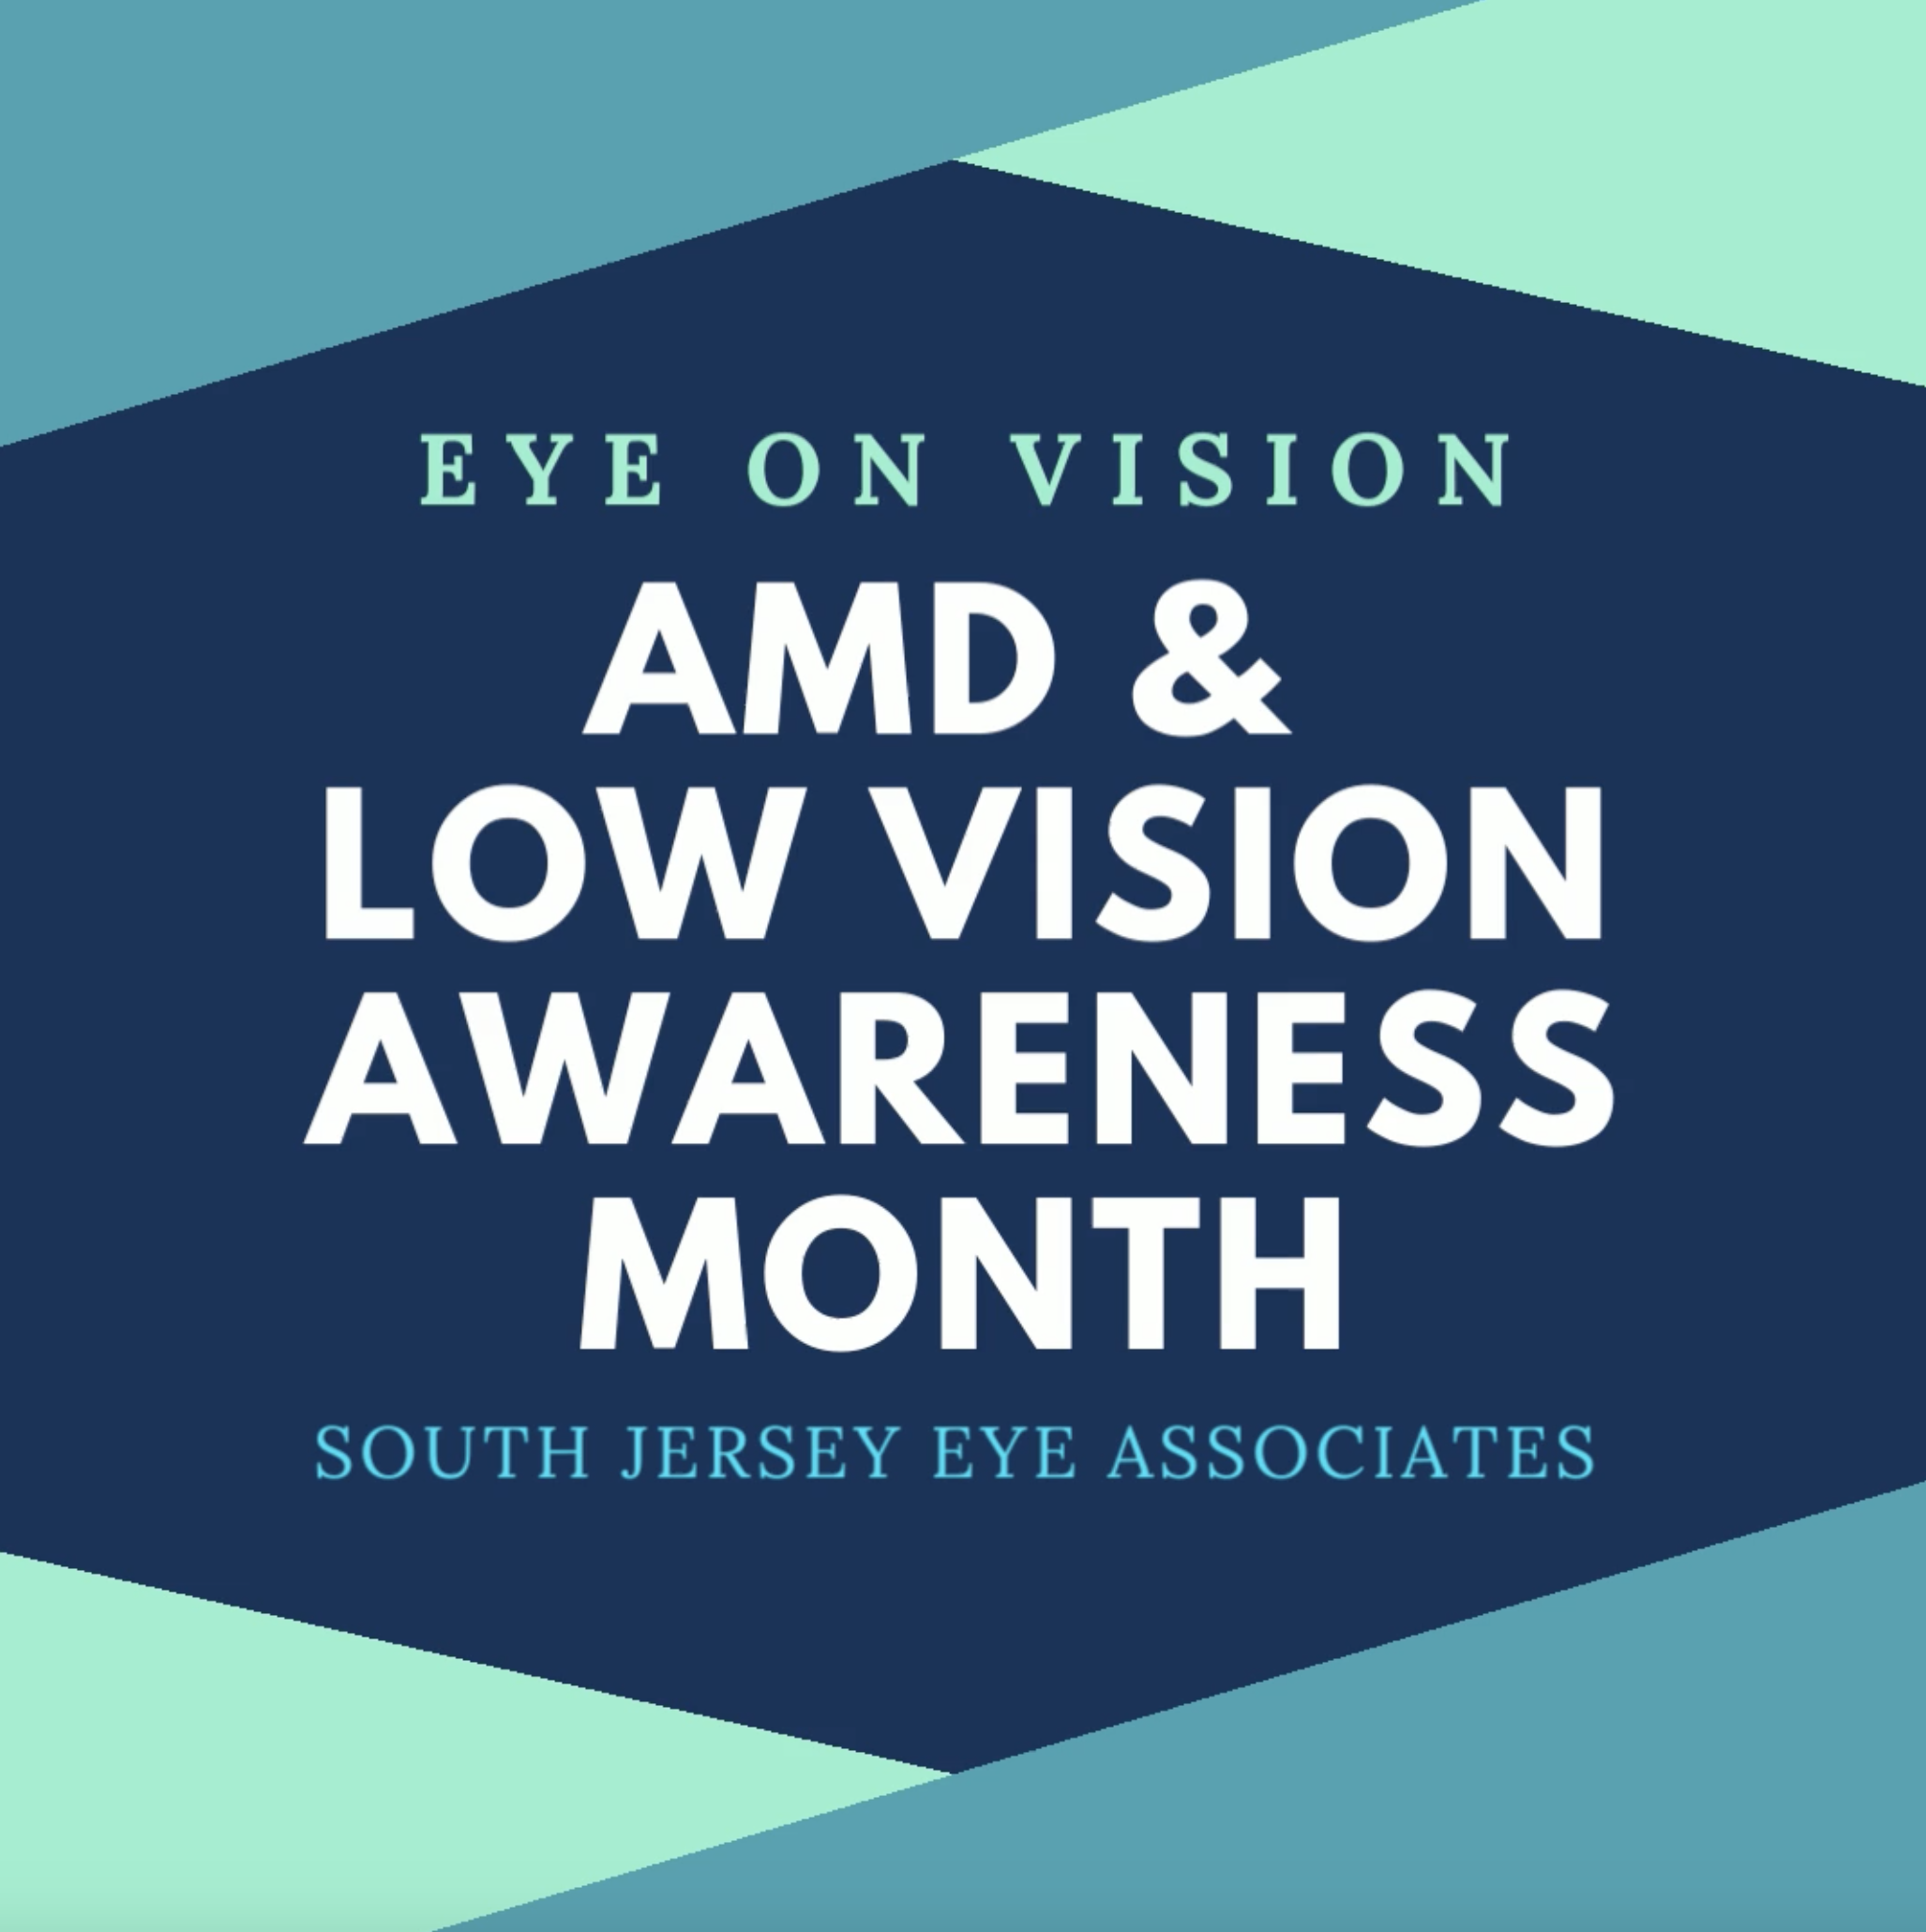 EYE ON VISION: AMD & LOW VISION AWARENESS MONTH